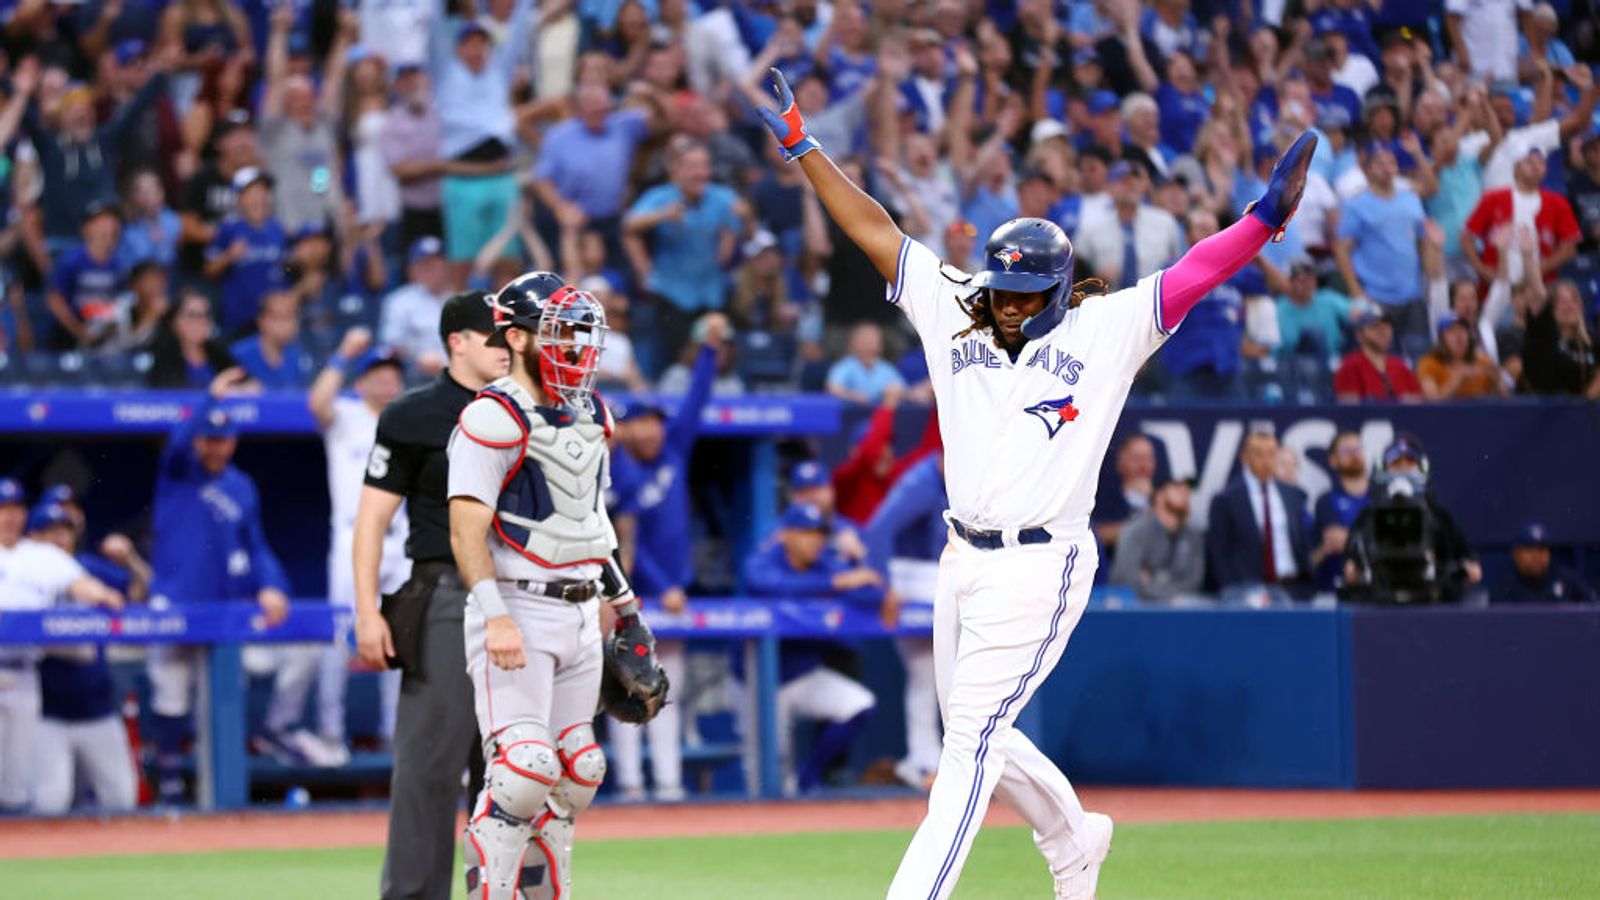 Blue Jays' Varsho makes spectacular redemption catch at the wall